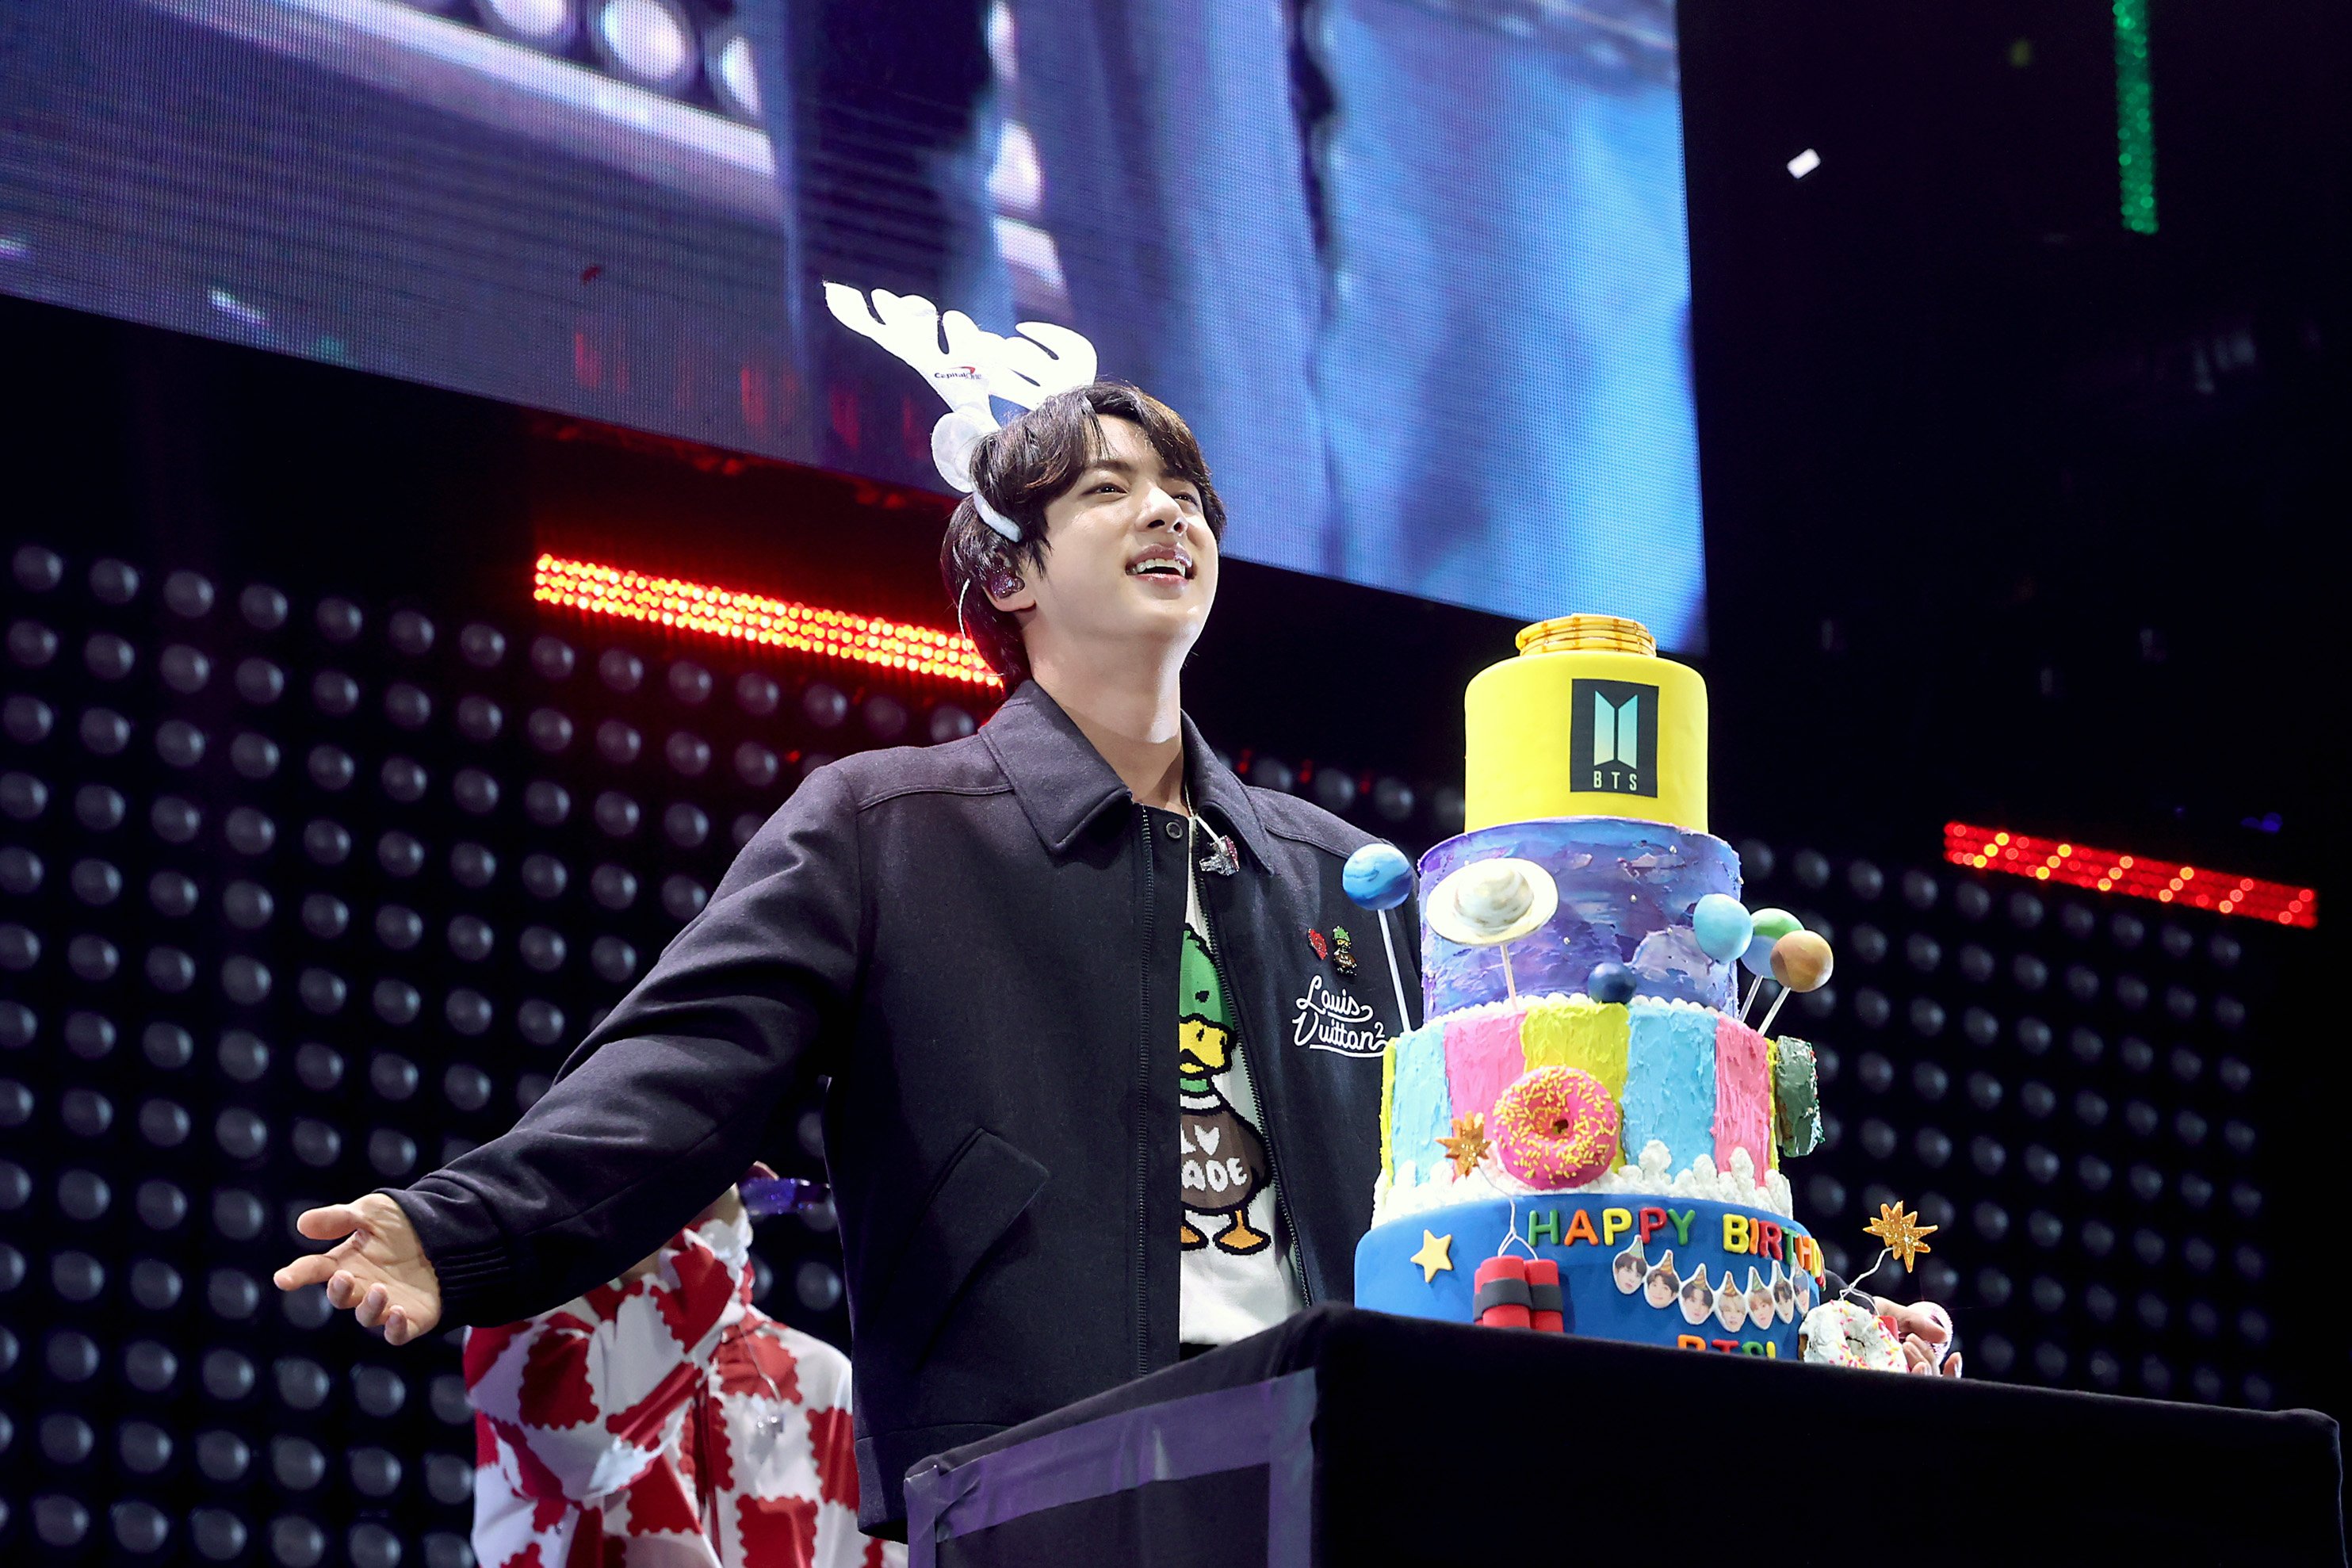 BTS sings 'Happy Birthday' to Jin as they perform on stage during iHeartRadio 102.7 KIIS FM's Jingle Ball 2021